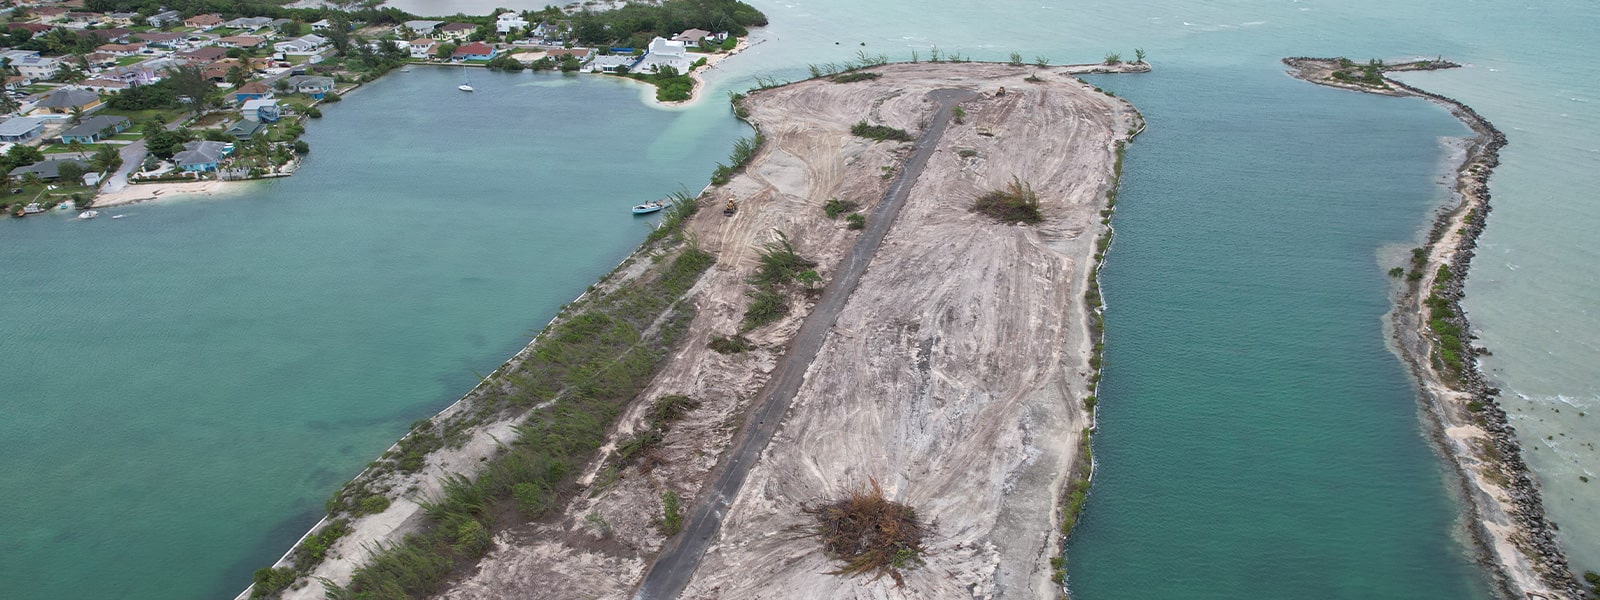 Clearing of Site Makes way for Marina Development in Nassau, Bahamas